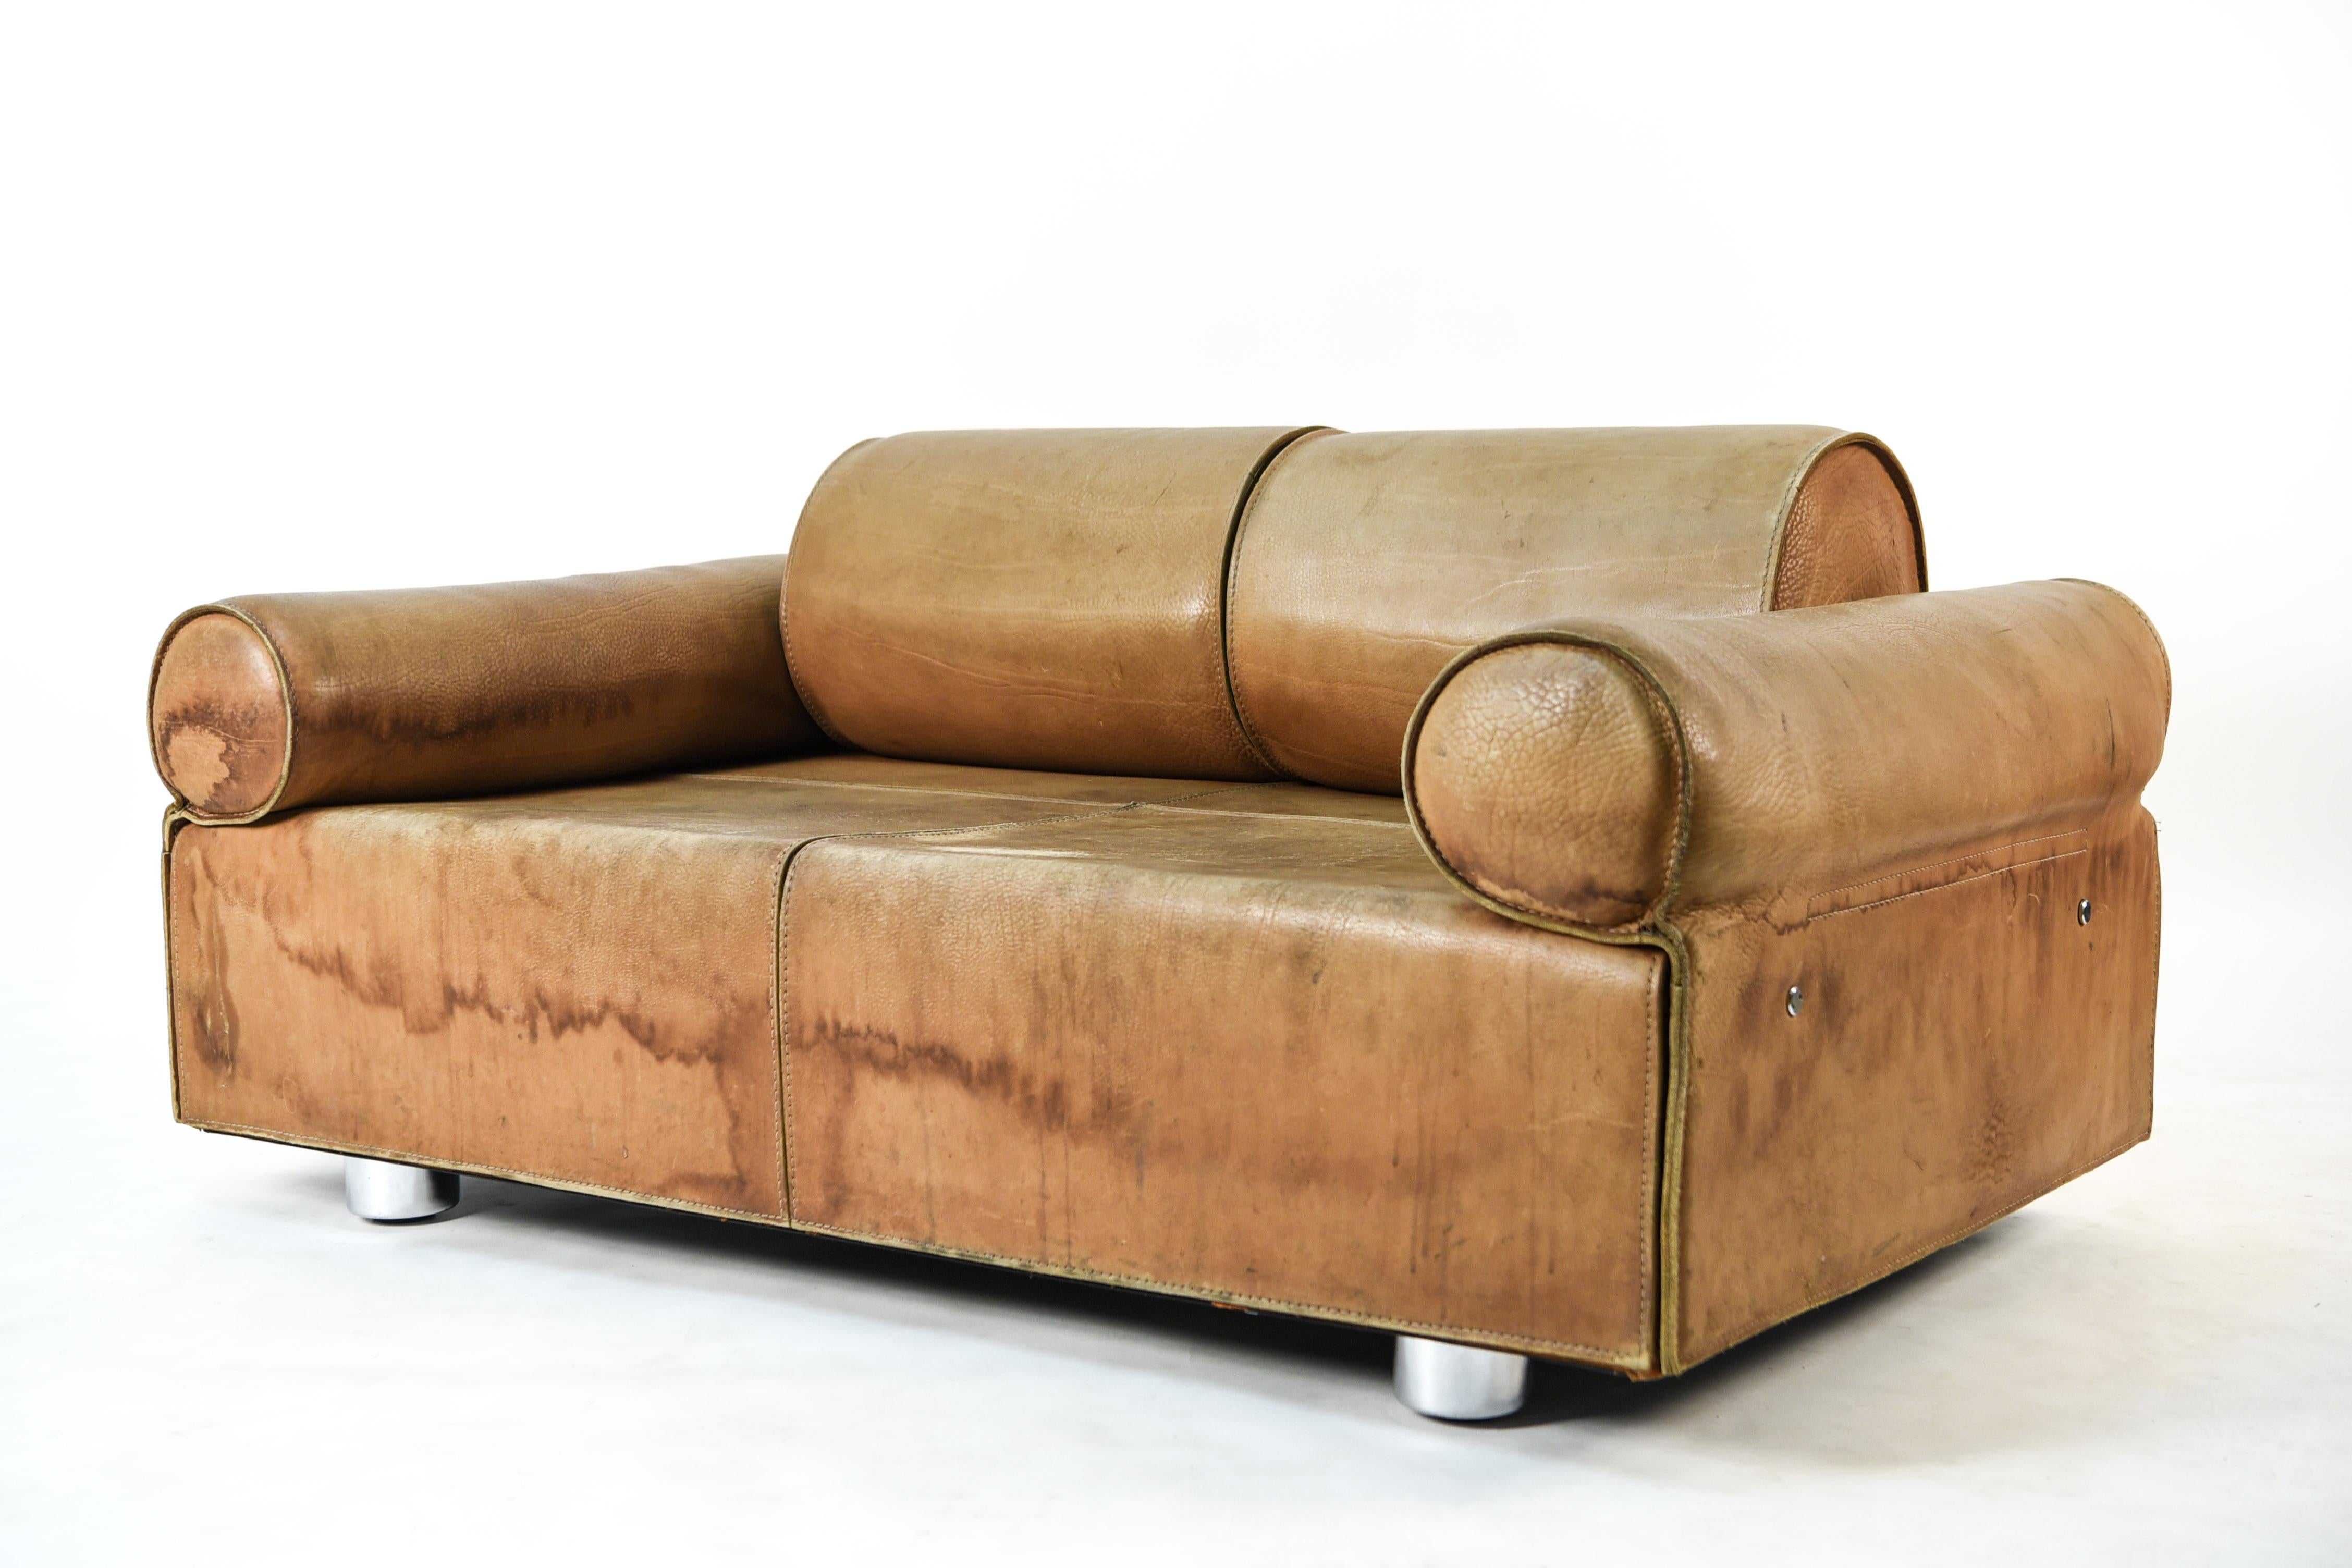 This is a very rare two-seat sofa or loveseat by Italian designer Marzio Cecchi, circa 1970. This piece has been upholstered in brown buffalo leather which has acquired a tasteful patination from age and use. The sofa design consists of spherical